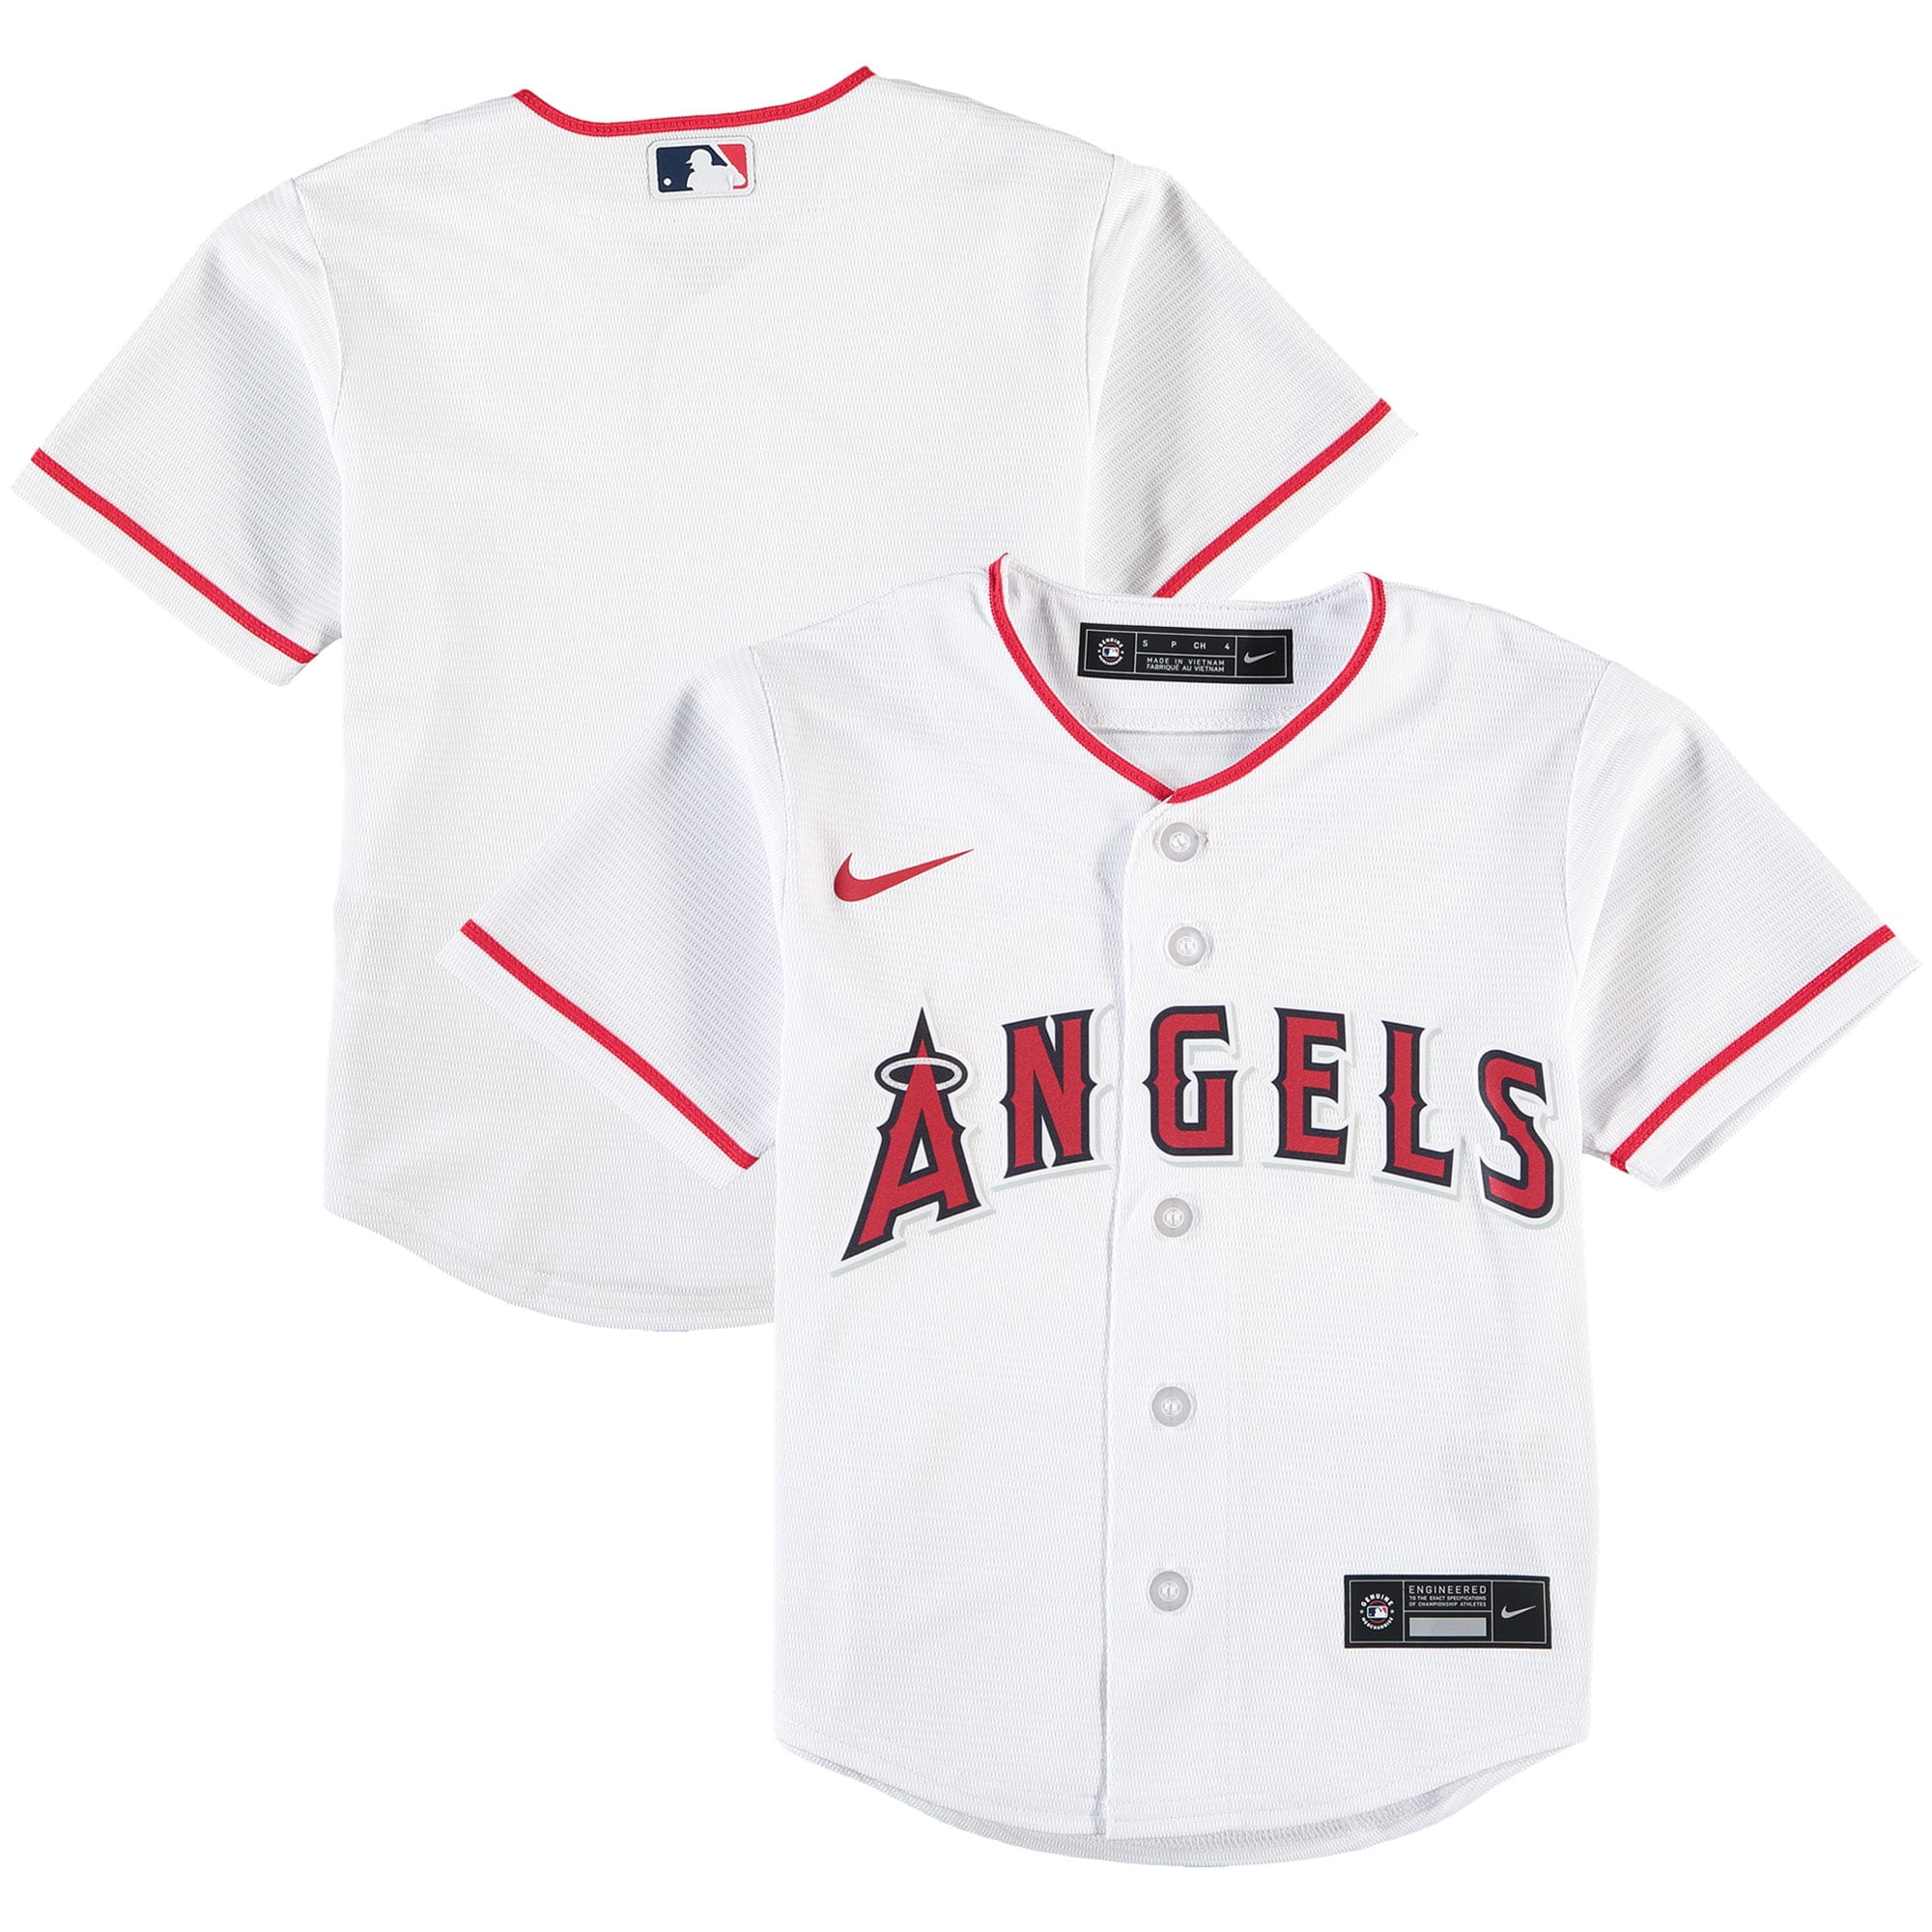 angels jersey 2020